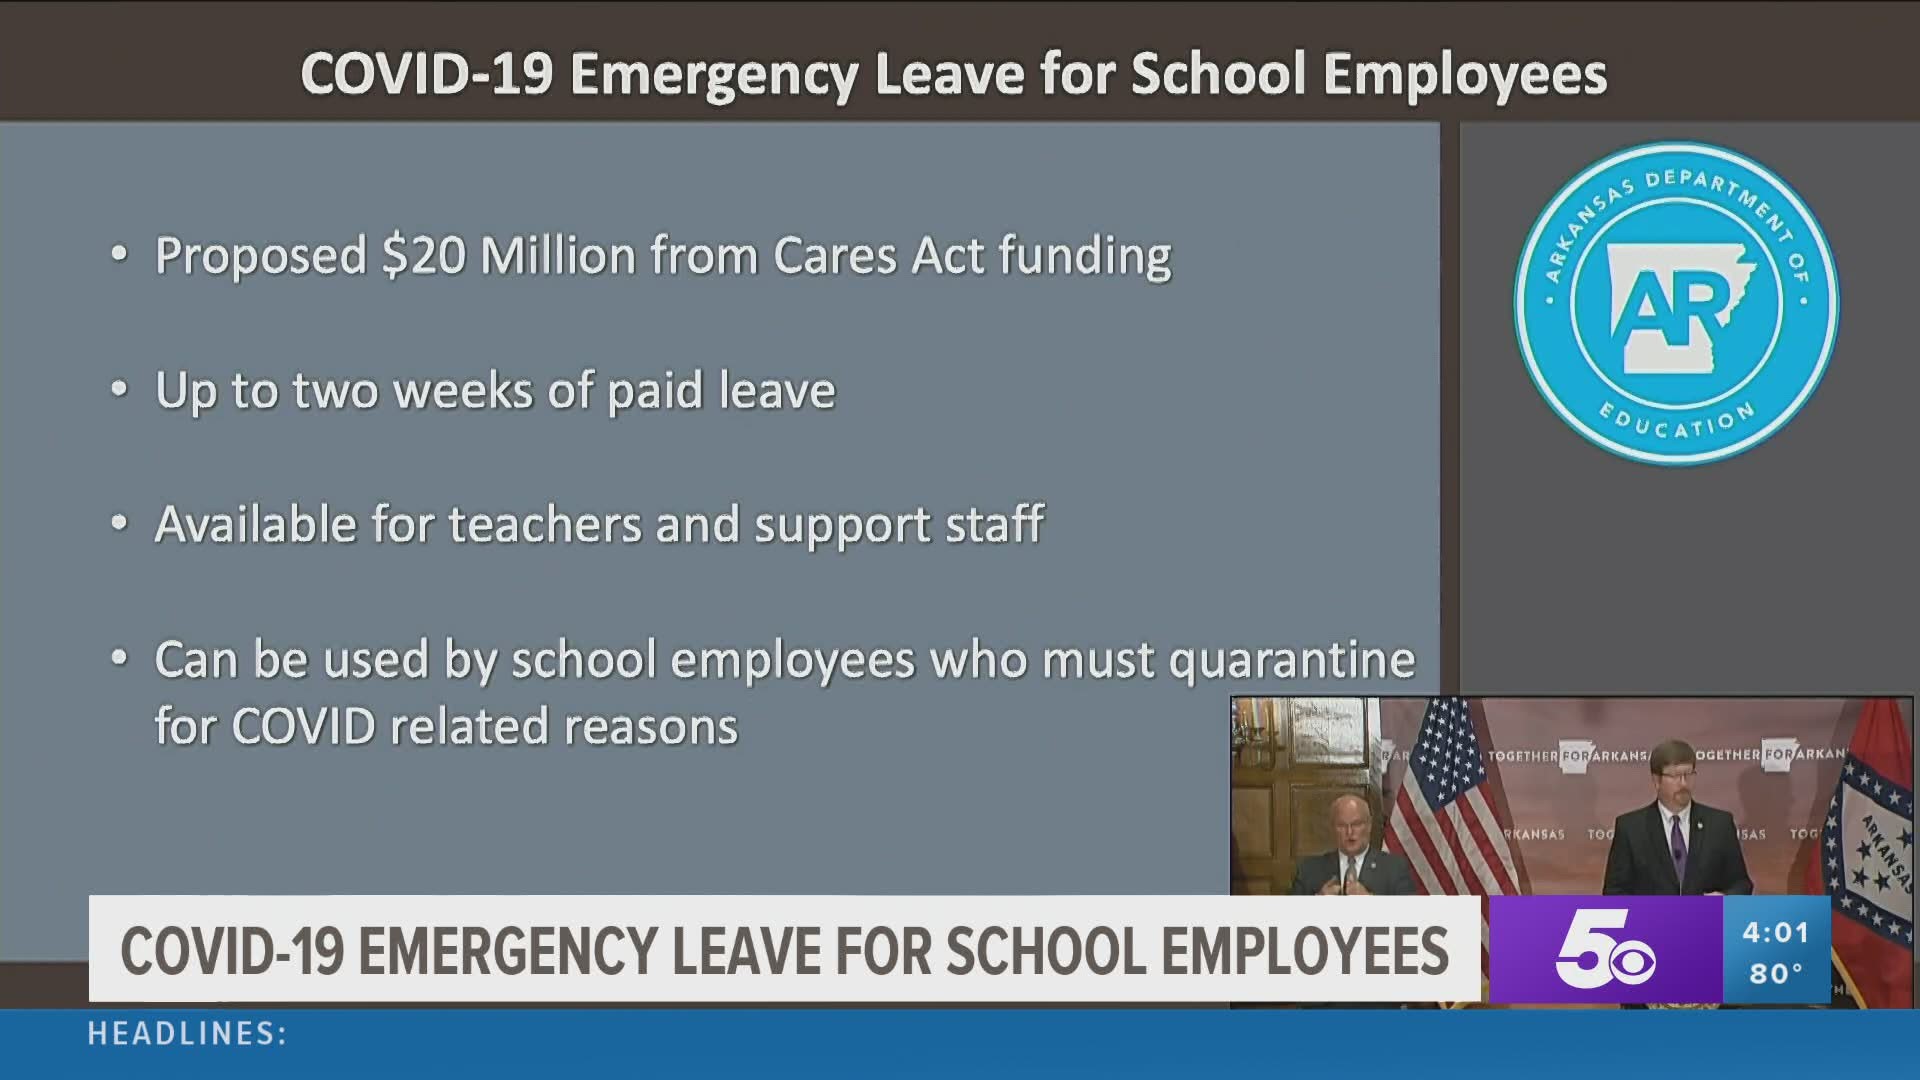 COVID-19 Emergency leave for school employees.